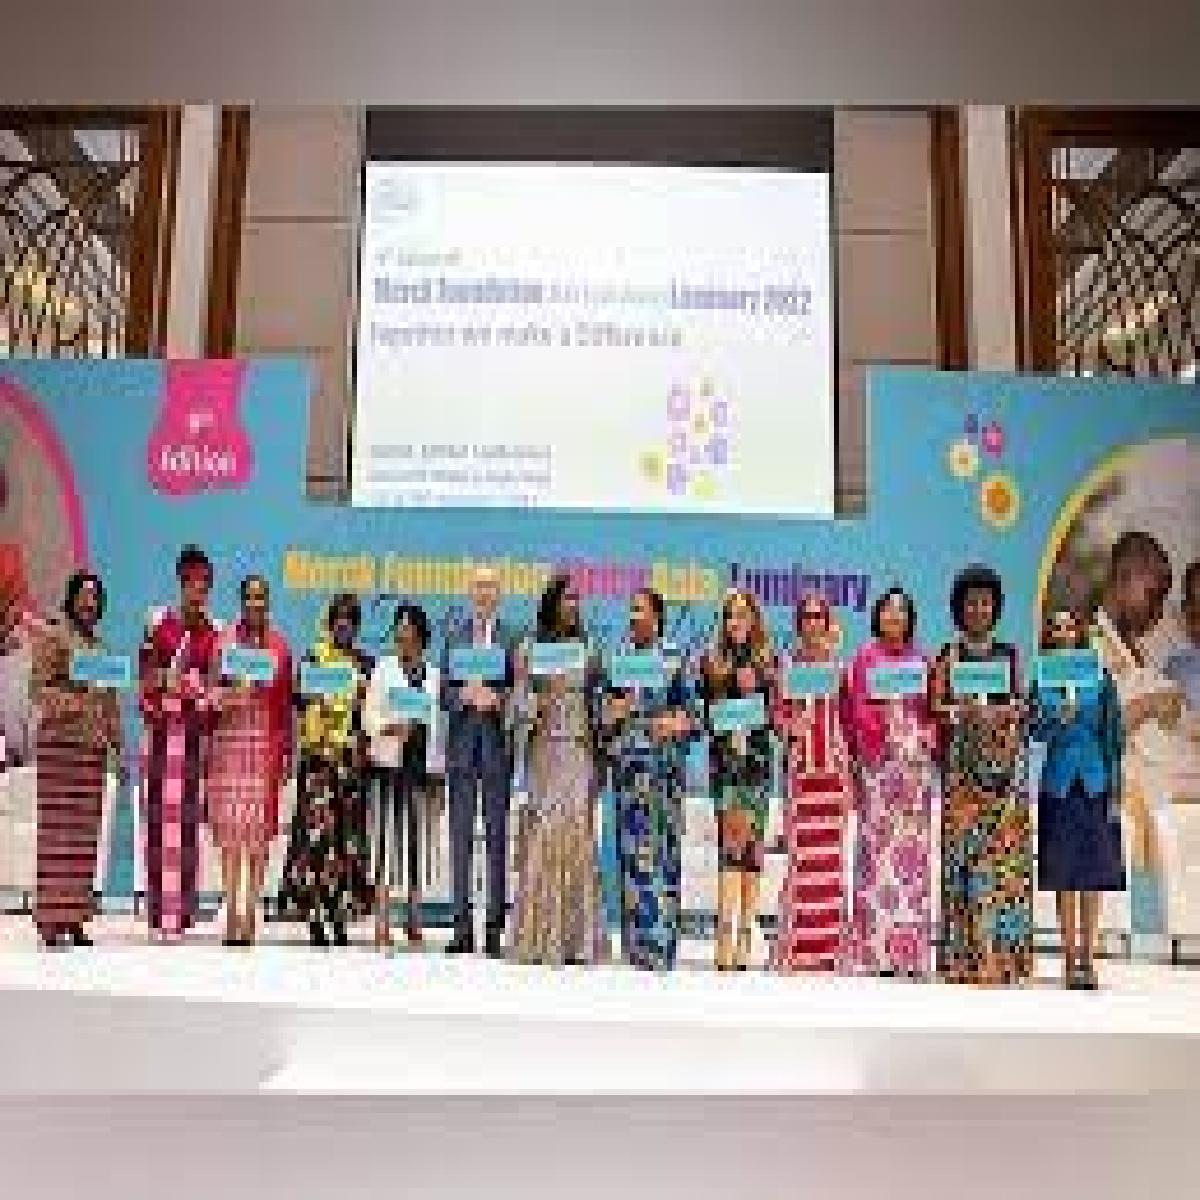 Merck Foundation 5th Anniversary with 13 African First Ladies at Merck Foundation Africa Asia Luminary 2022